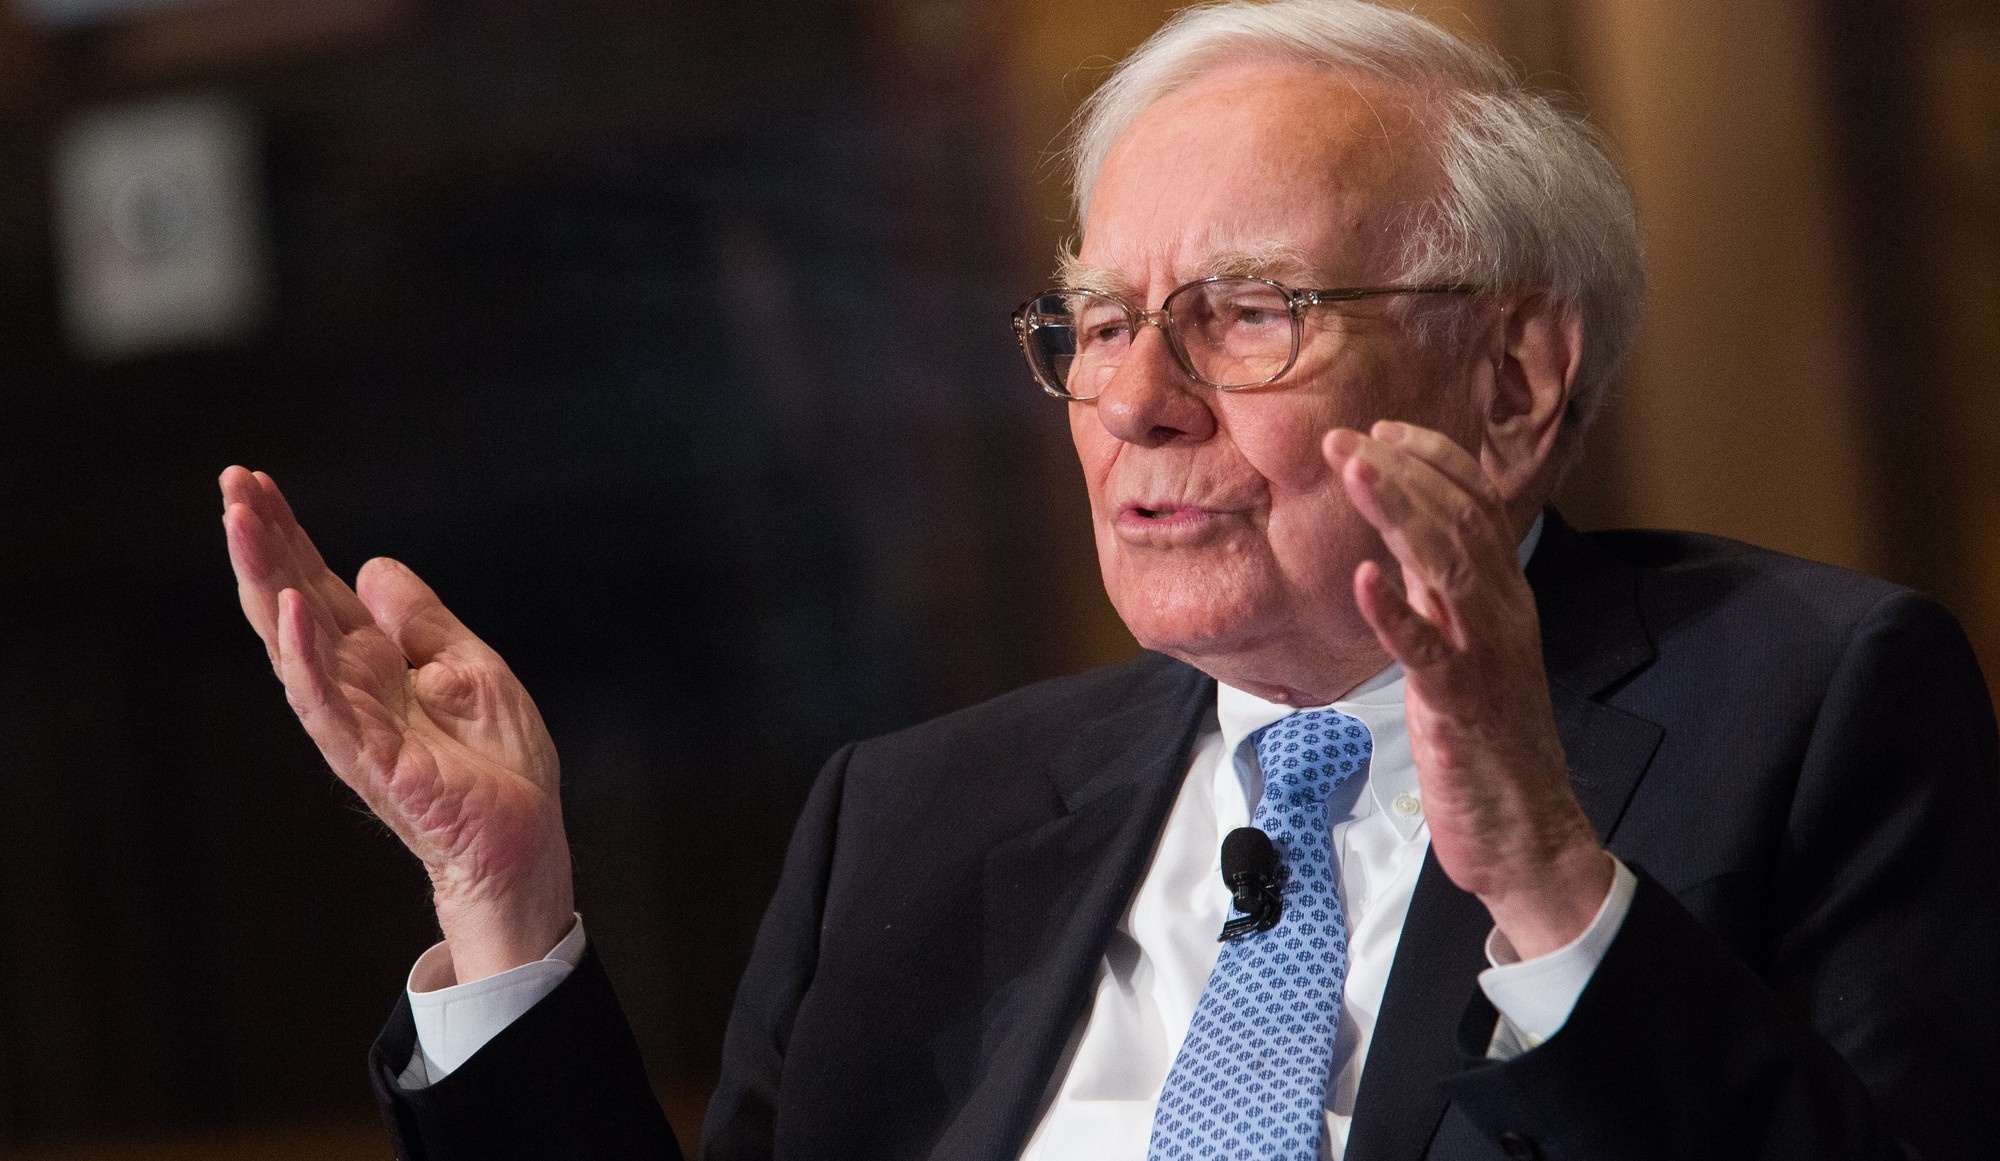 There's a reason why Warren Buffet is known as the "Oracle of Omaha."
At the tender age of 11, Buffet had already started buying stocks and now he's one of the richest business leaders in the whole wide world.